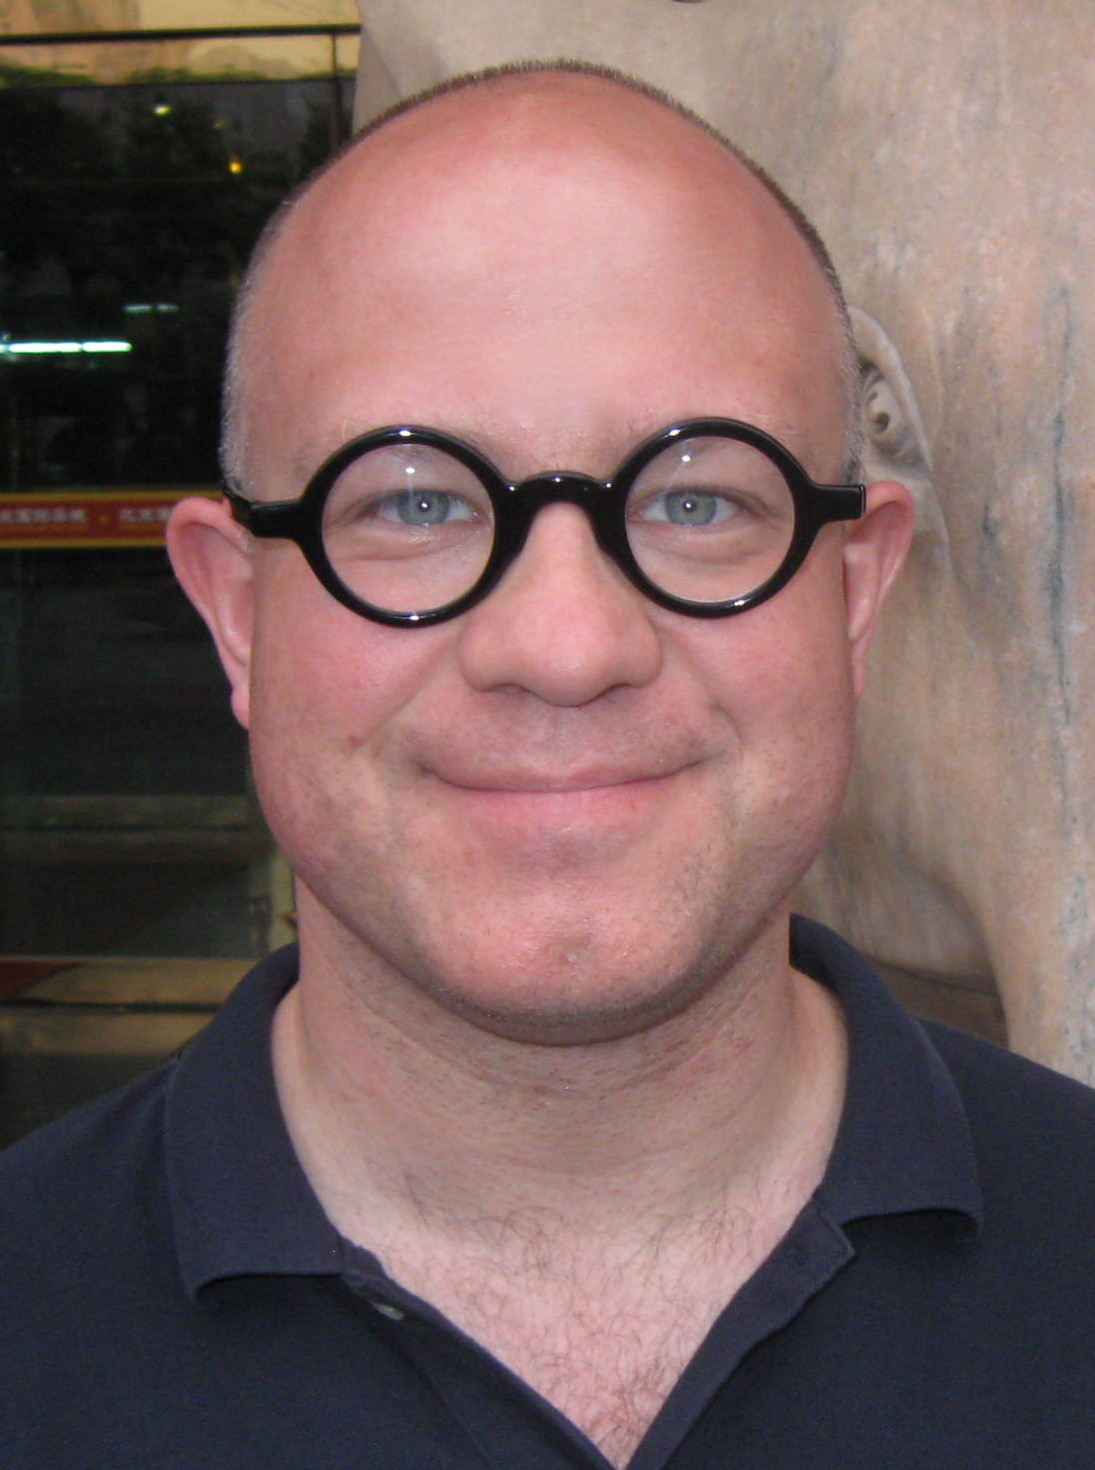 A headshot of smiling Matthew D Walker who is wearing round shaped glasses with a black frame and a dark blue polo shirt.